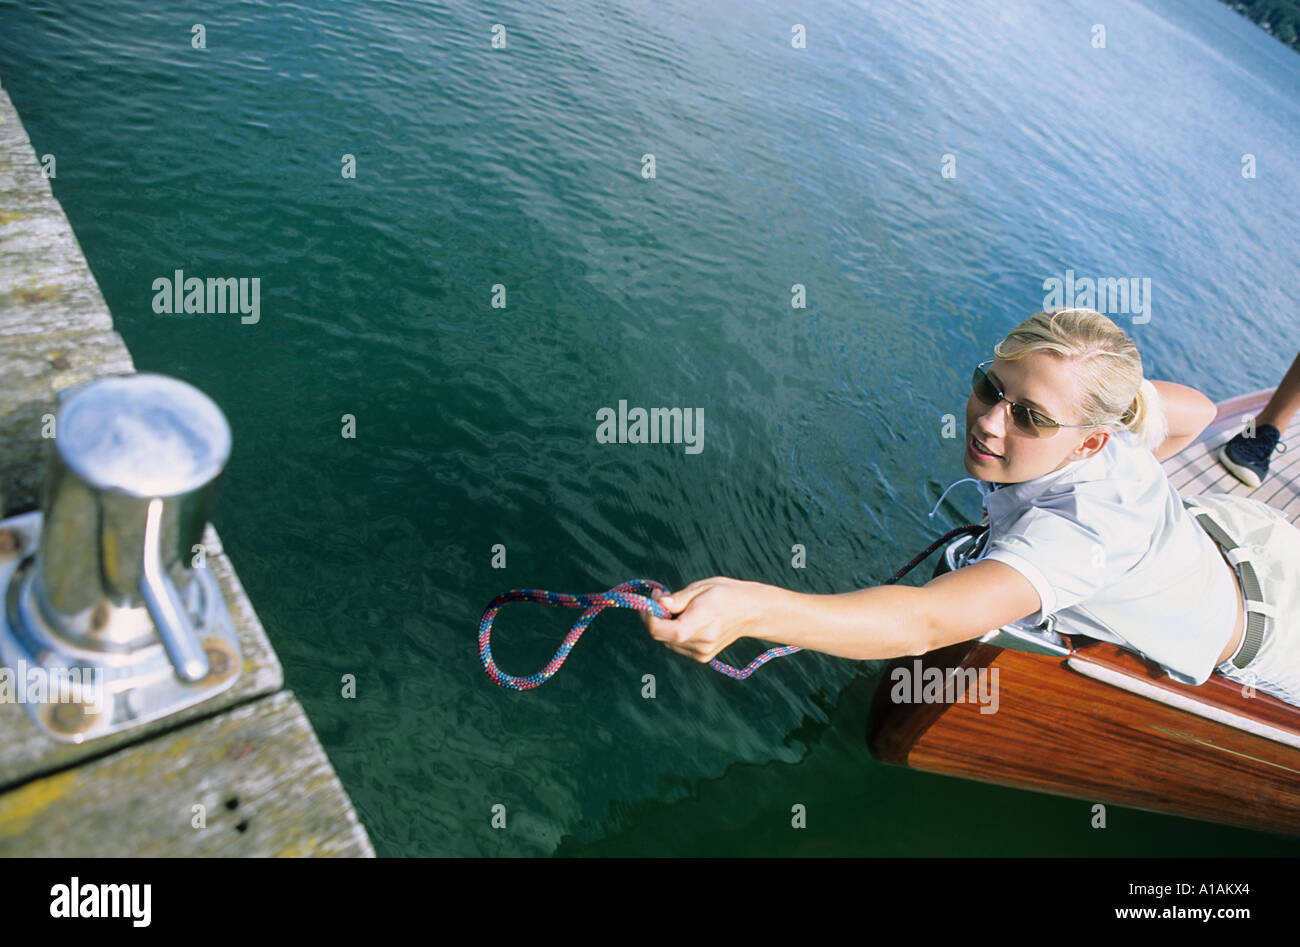 Woman on boat reaching for jetty Stock Photo